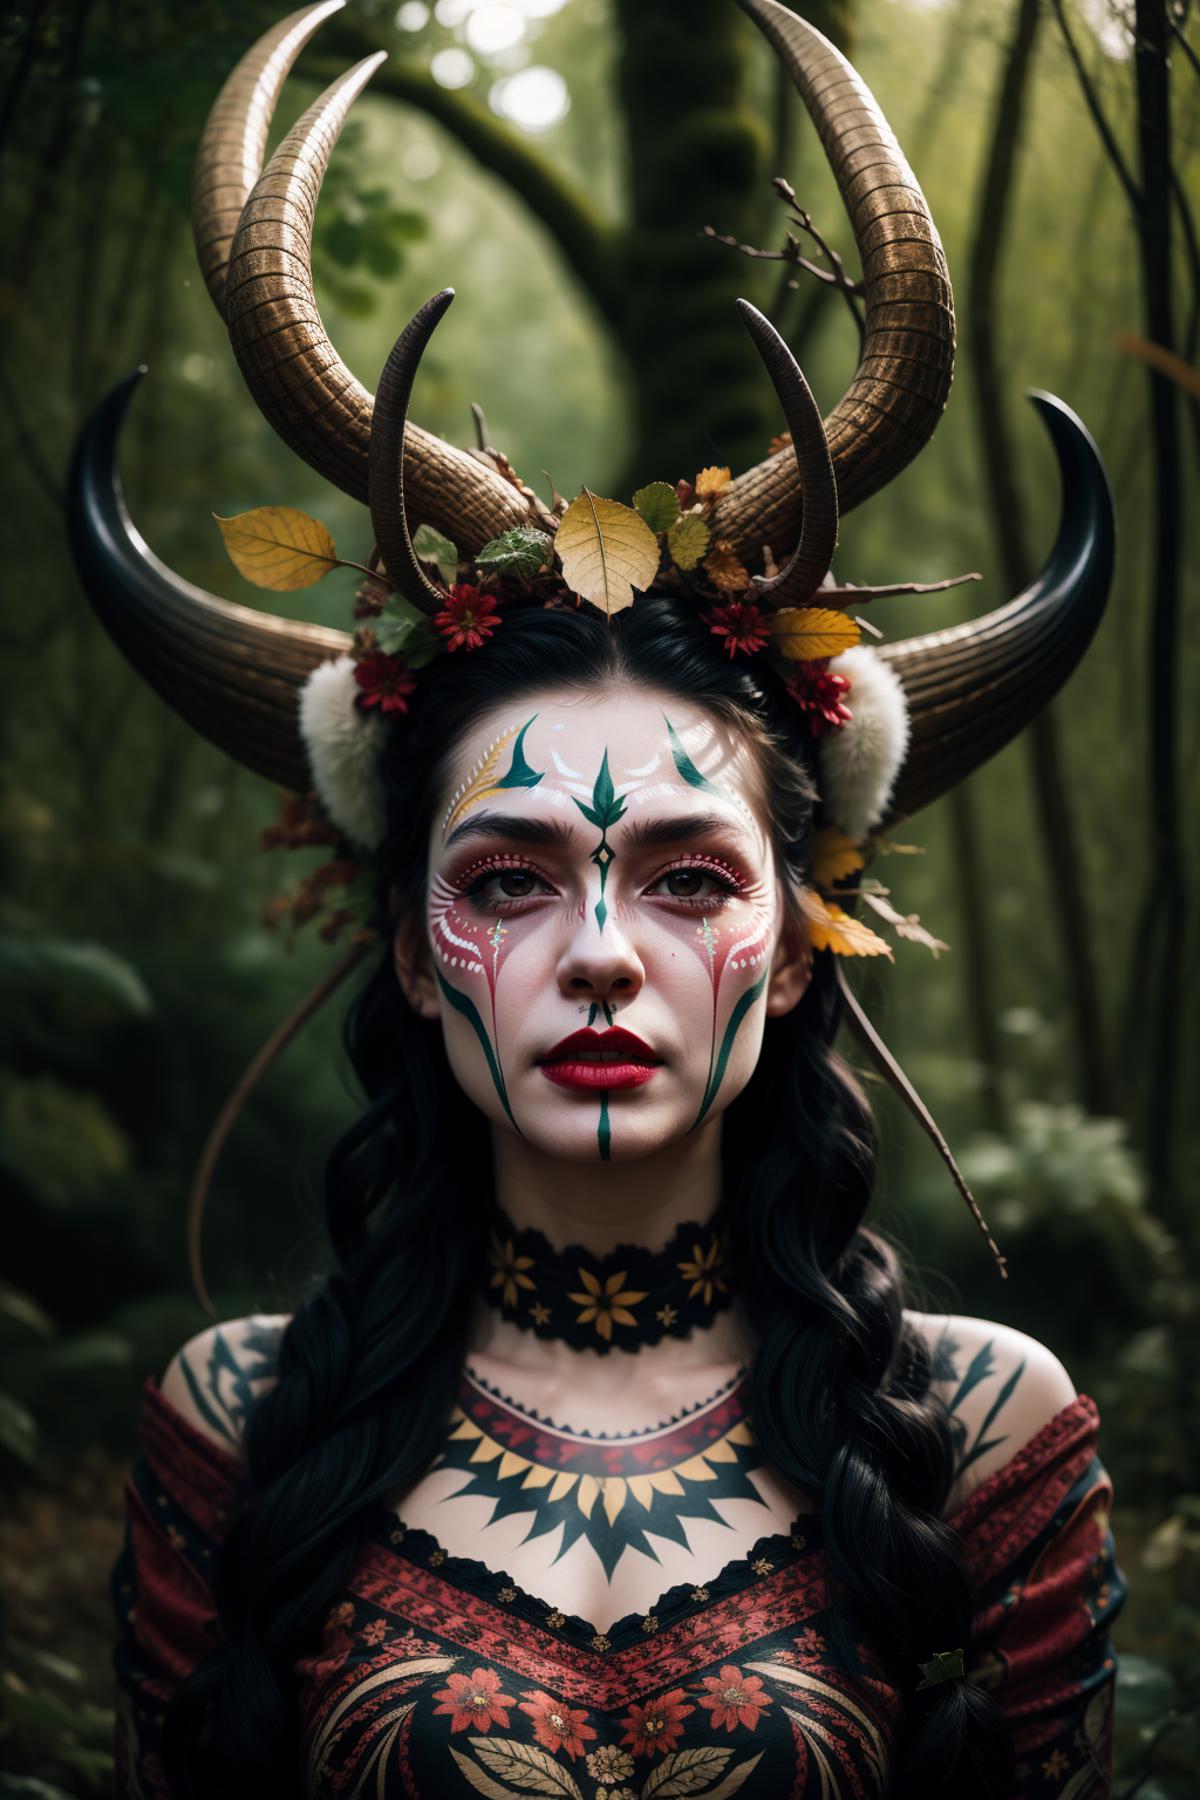 A woman with painted face and body art, wearing a head dress with horns and flowers, standing in a forest.